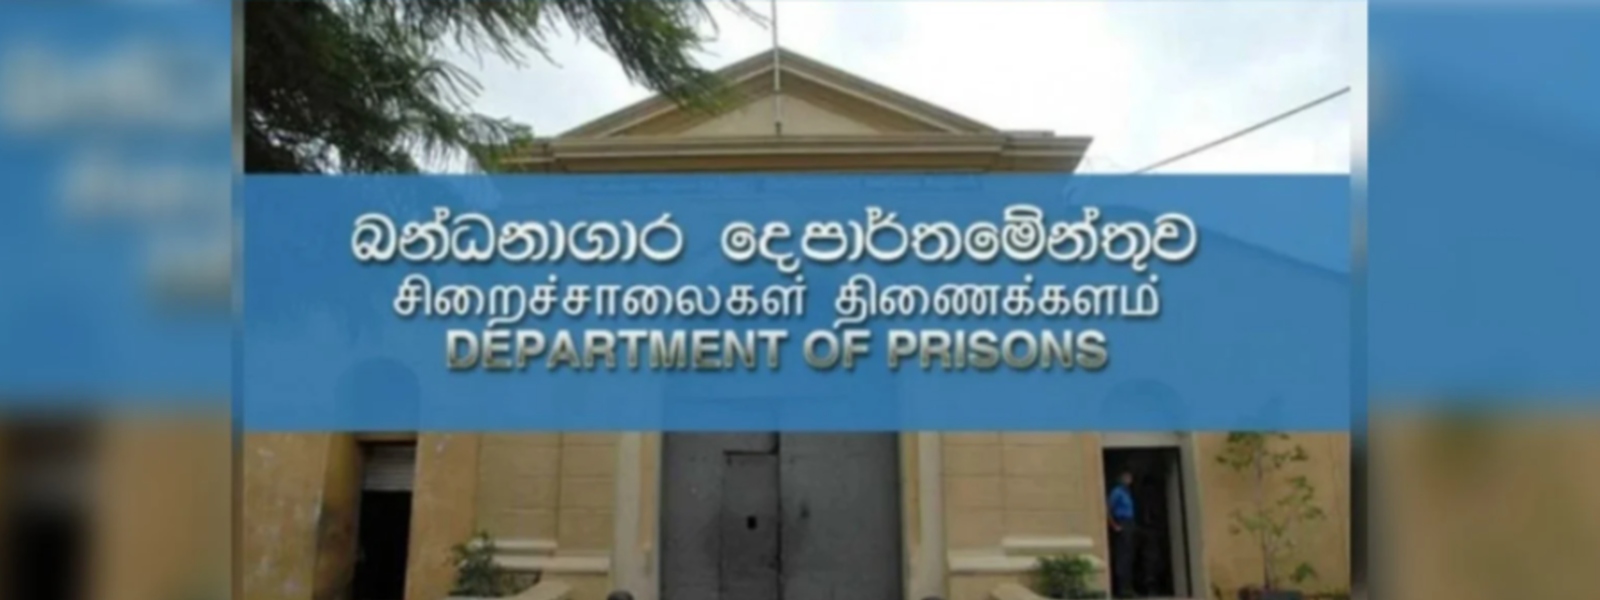 COVID-19 CASES IN PRISONS RISE TO 3611